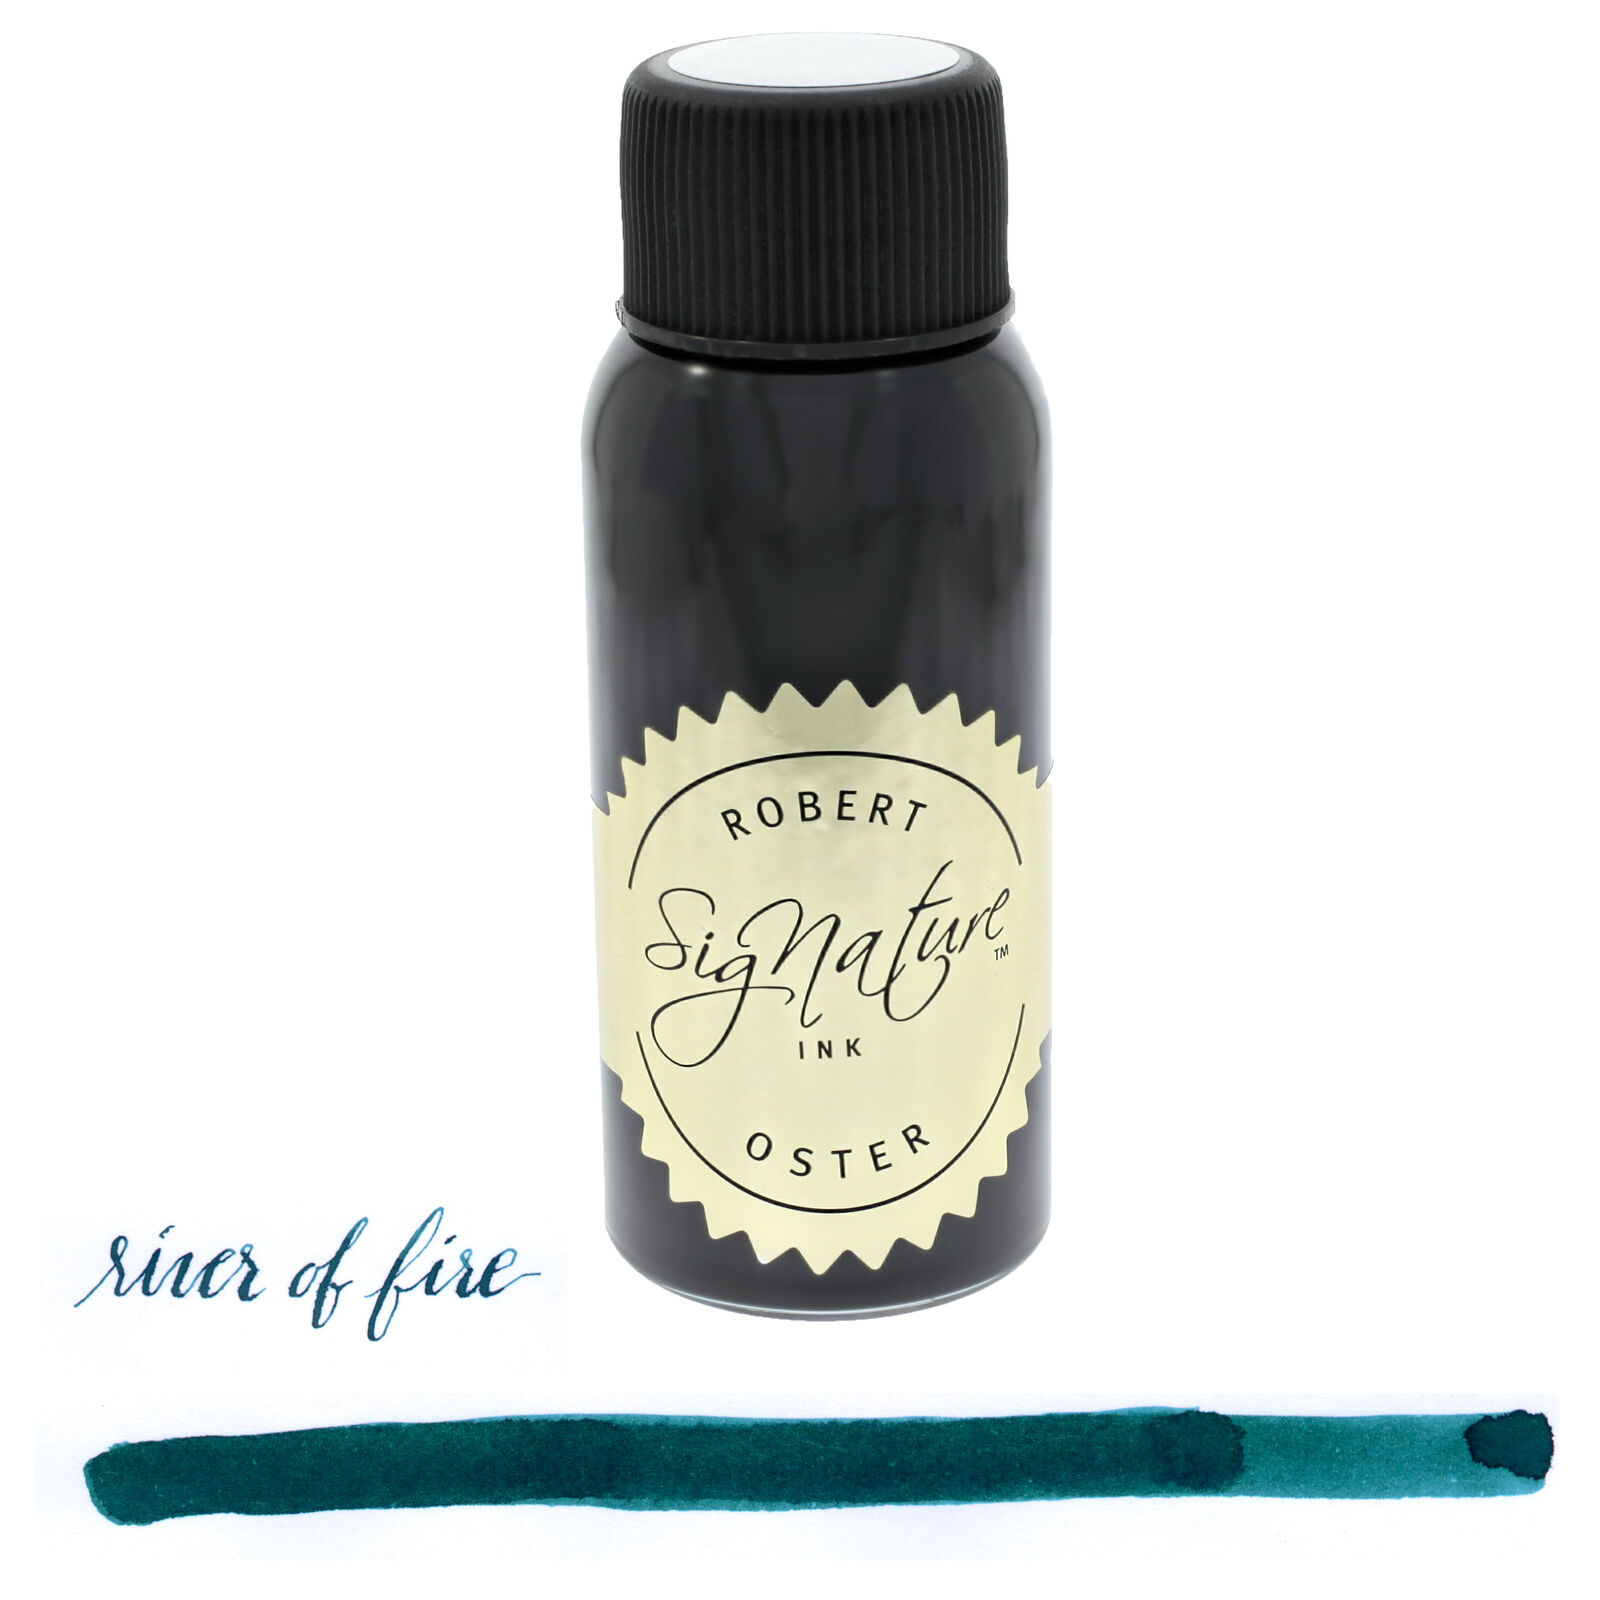 Robert Oster Signature River of Fire Teal 50ml Bottled Ink for Fountain Pens